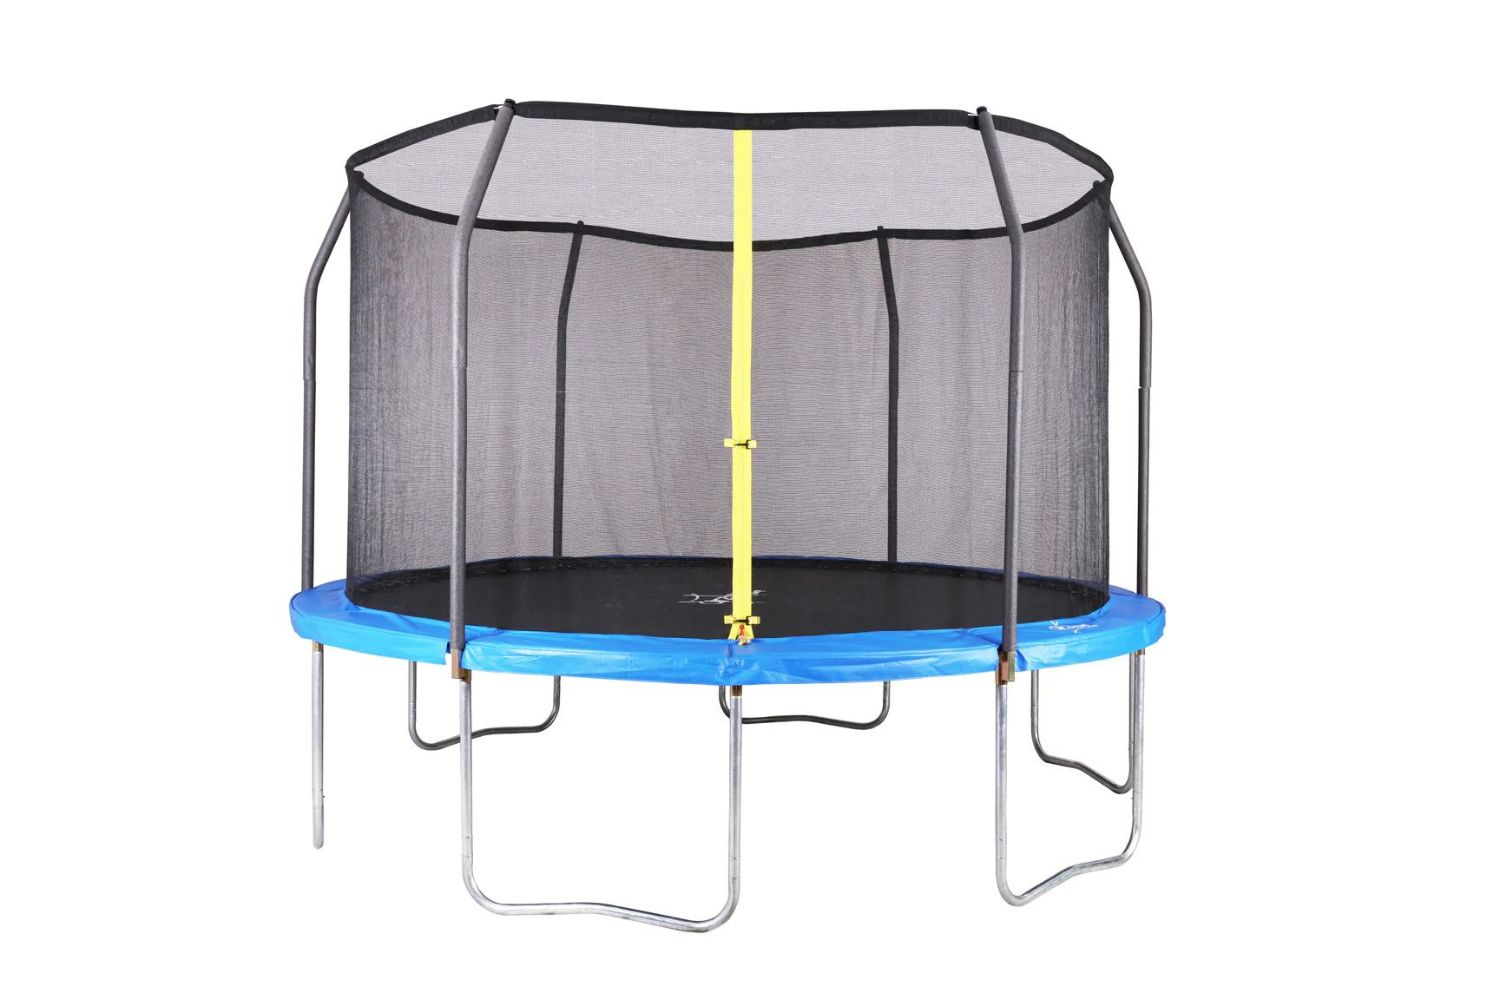 Brand New & Boxed 12 Foot High Quality Trampolines with Enclosures - Trade & Single Lots - Delivery Available!